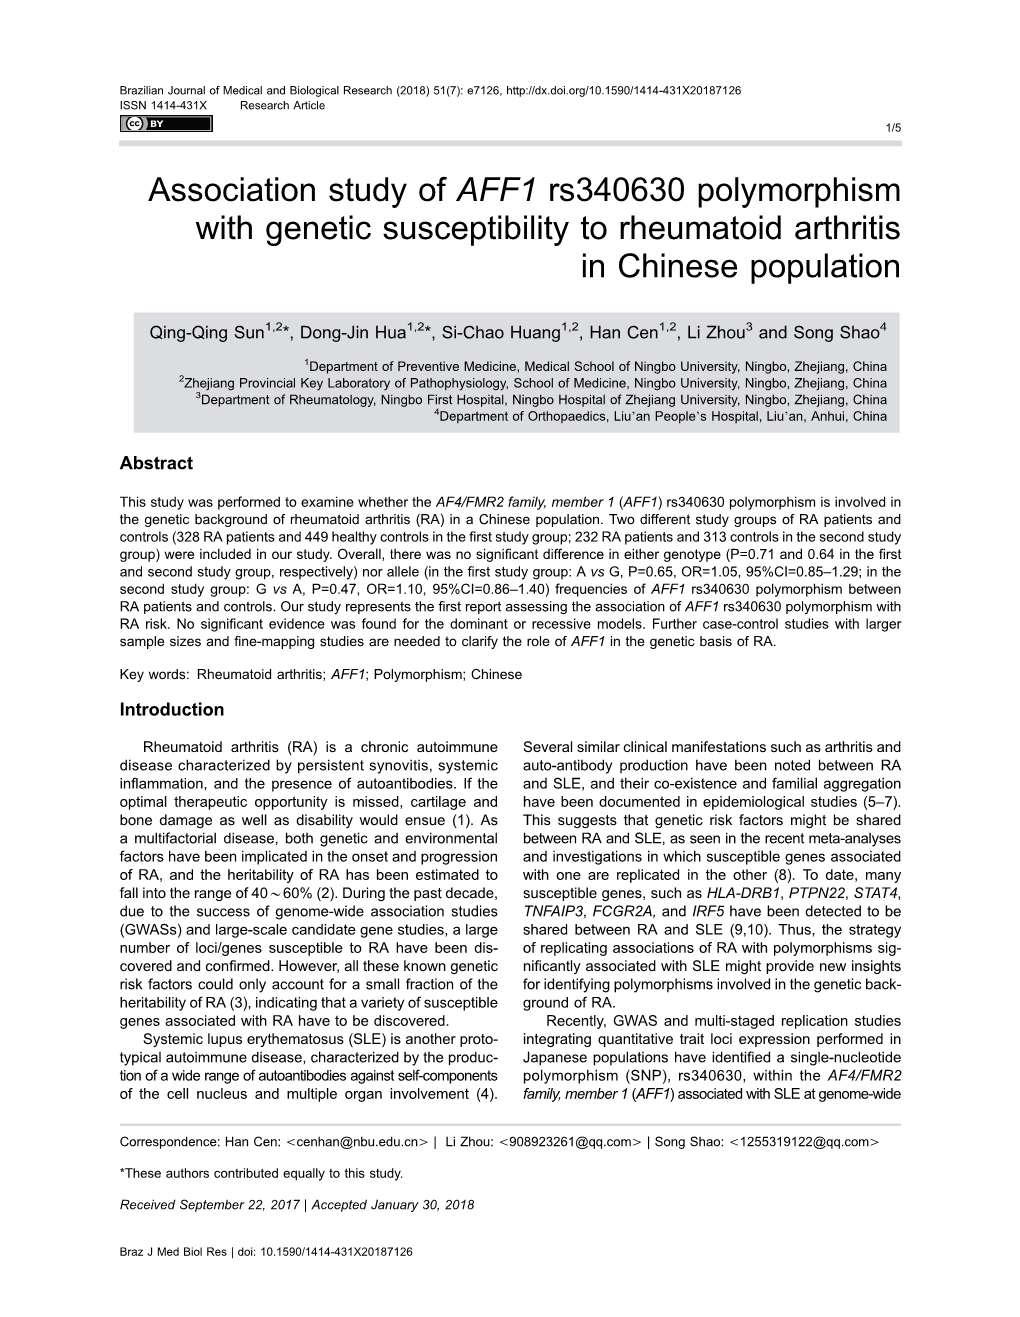 Association Study of AFF1 Rs340630 Polymorphism with Genetic Susceptibility to Rheumatoid Arthritis in Chinese Population